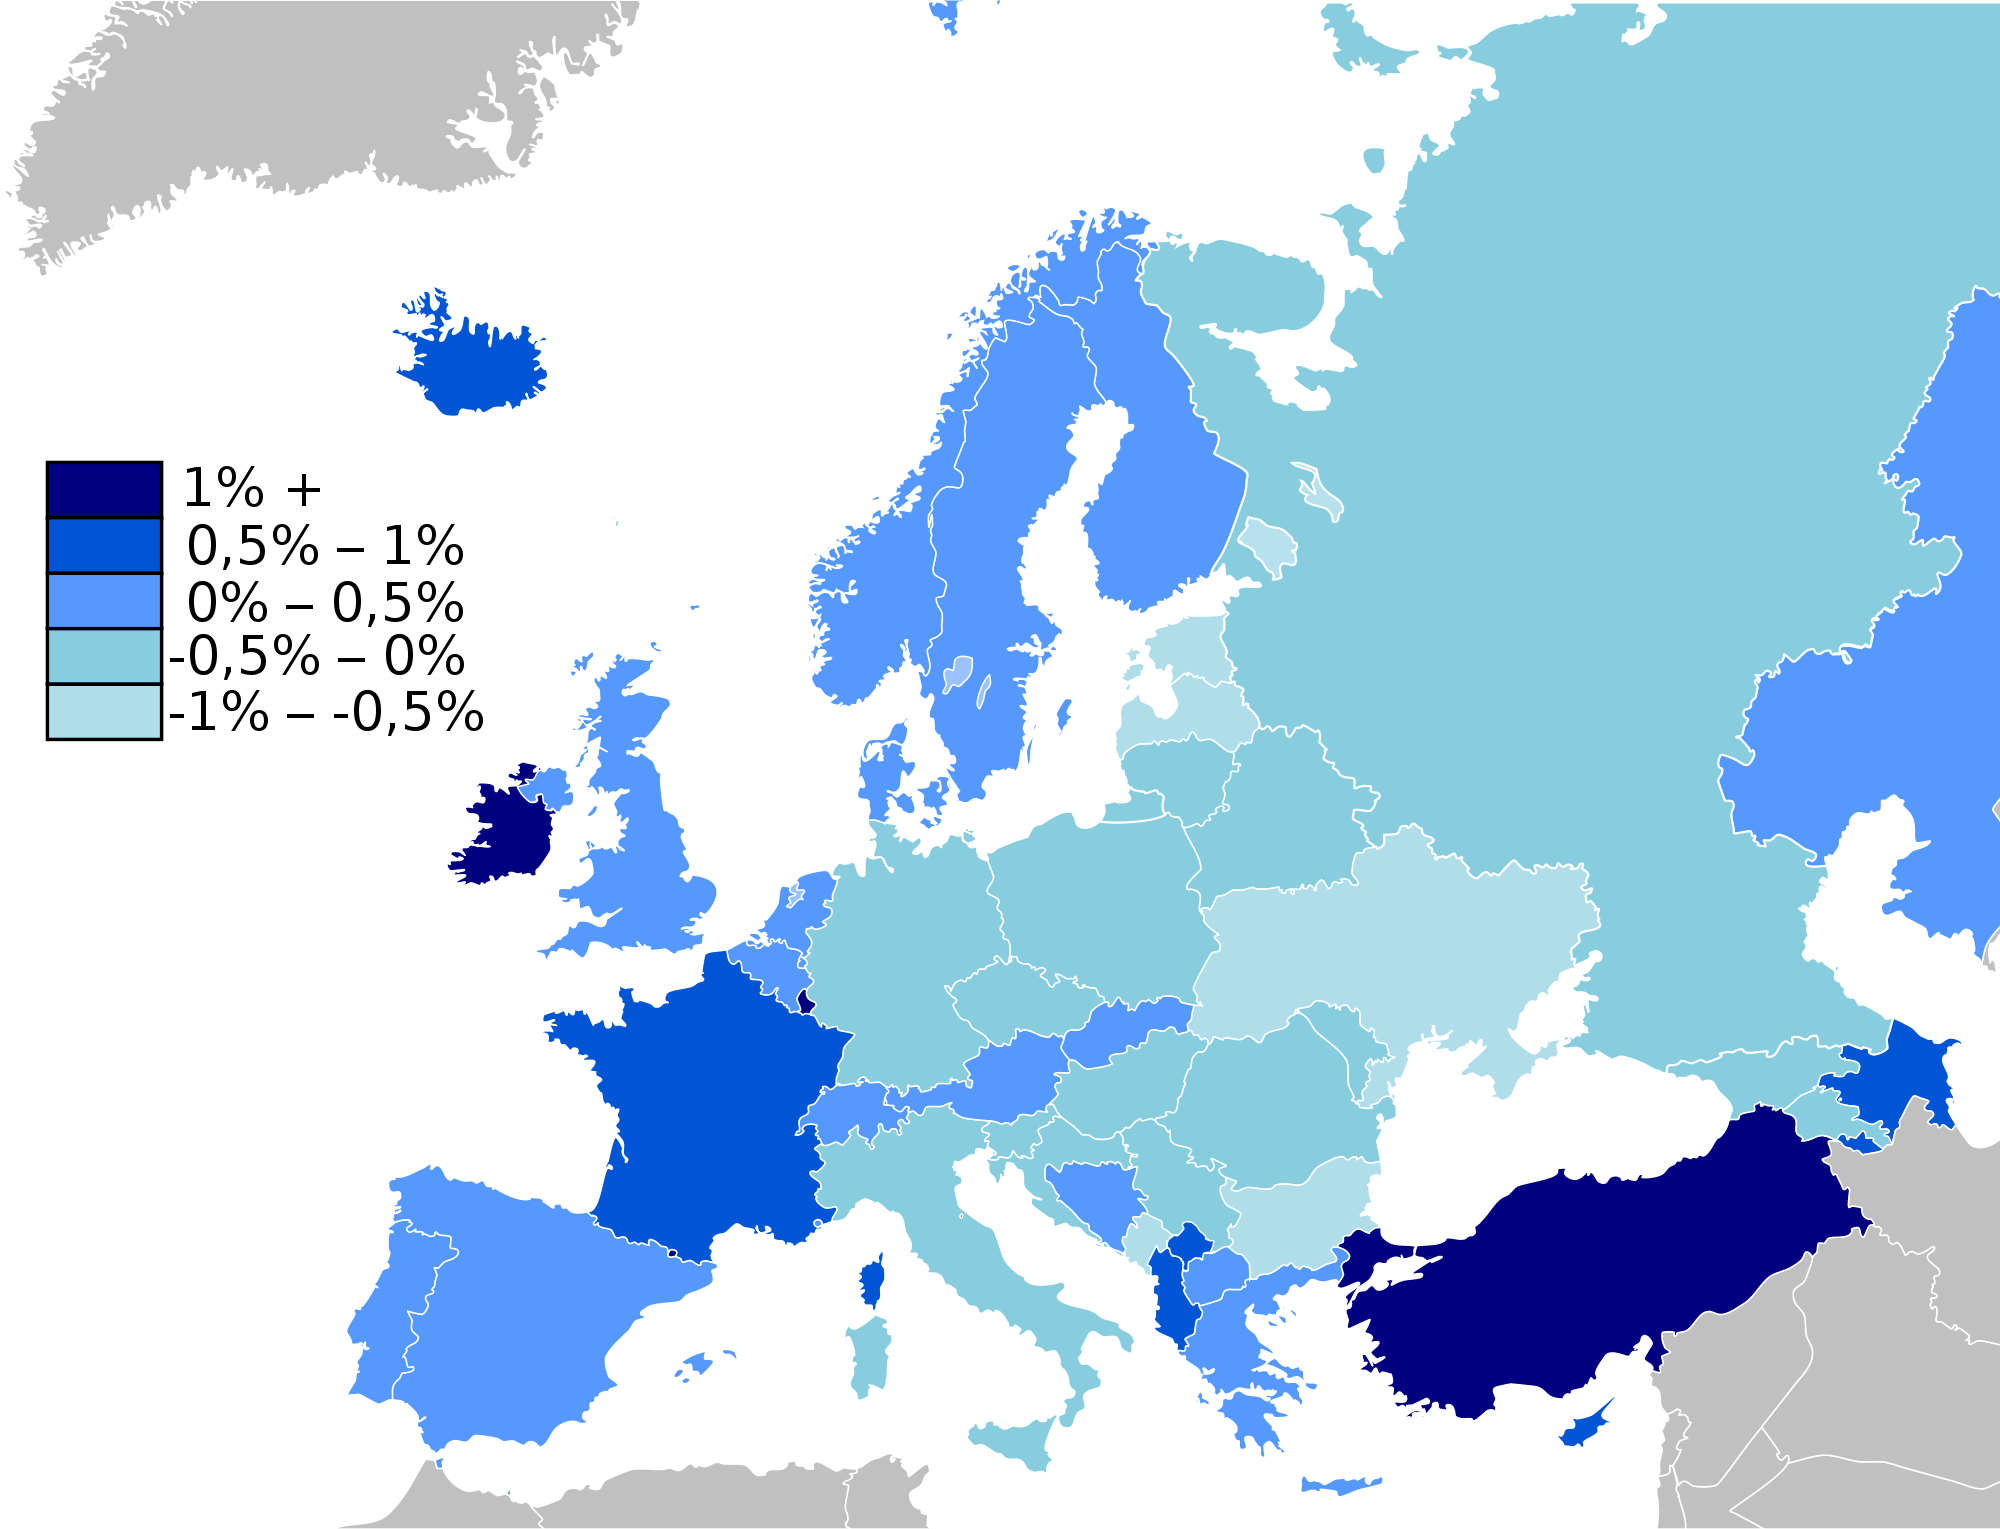 Countries Population Growth in Europe 2009